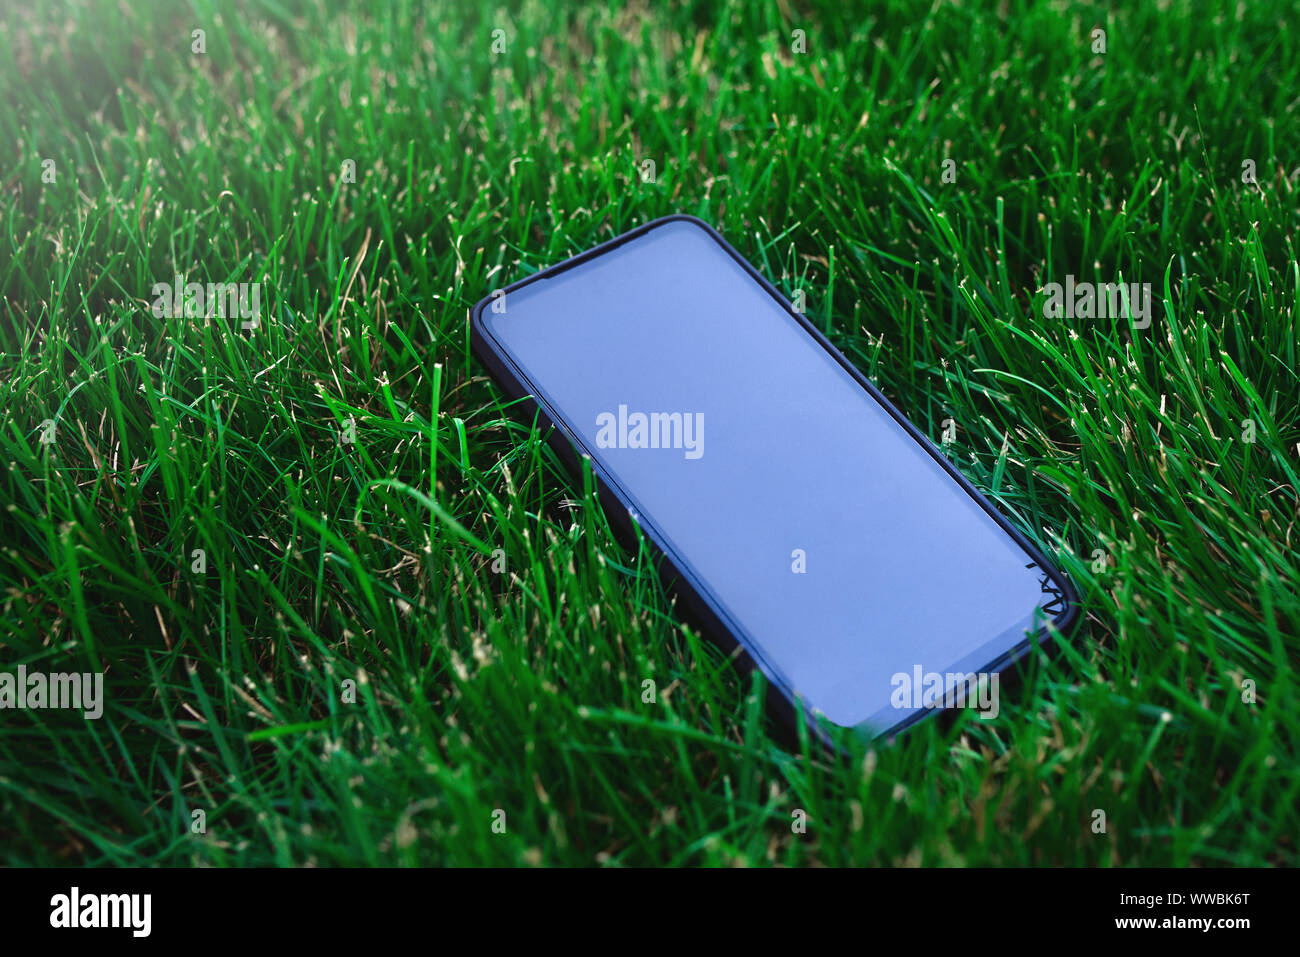 Smartphone and black screen on grass background Stock Photo